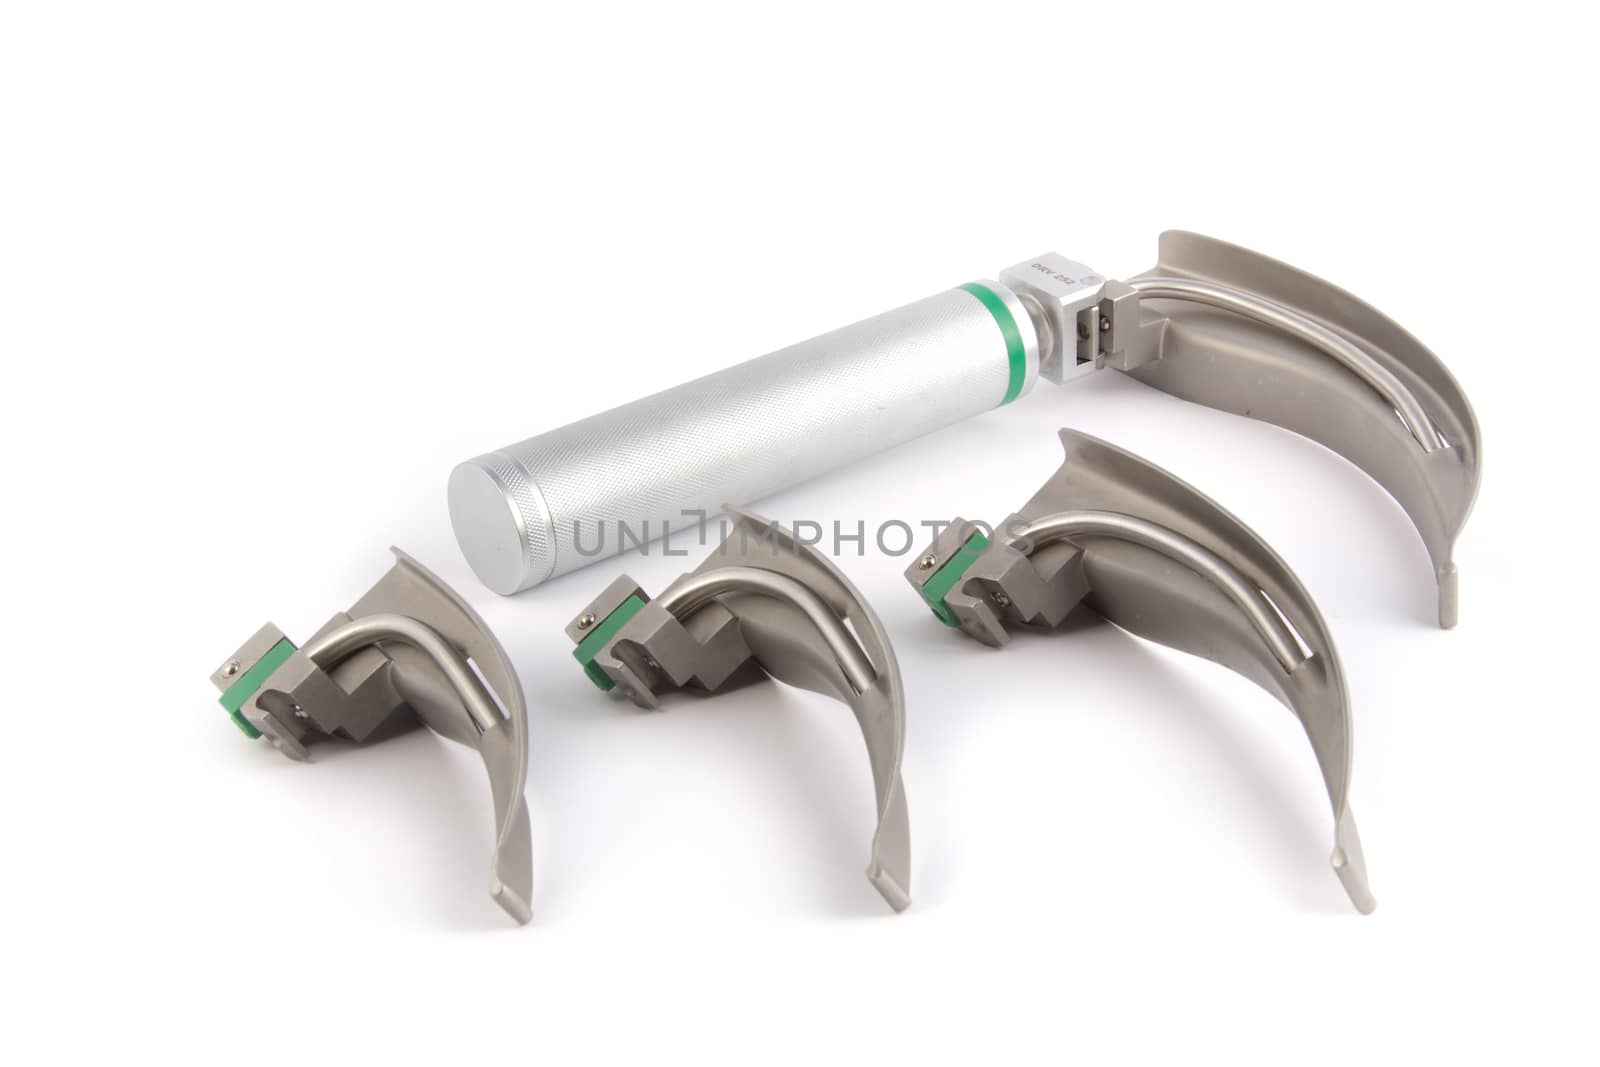 Laryngoscope with smaller heads isolated on a white background